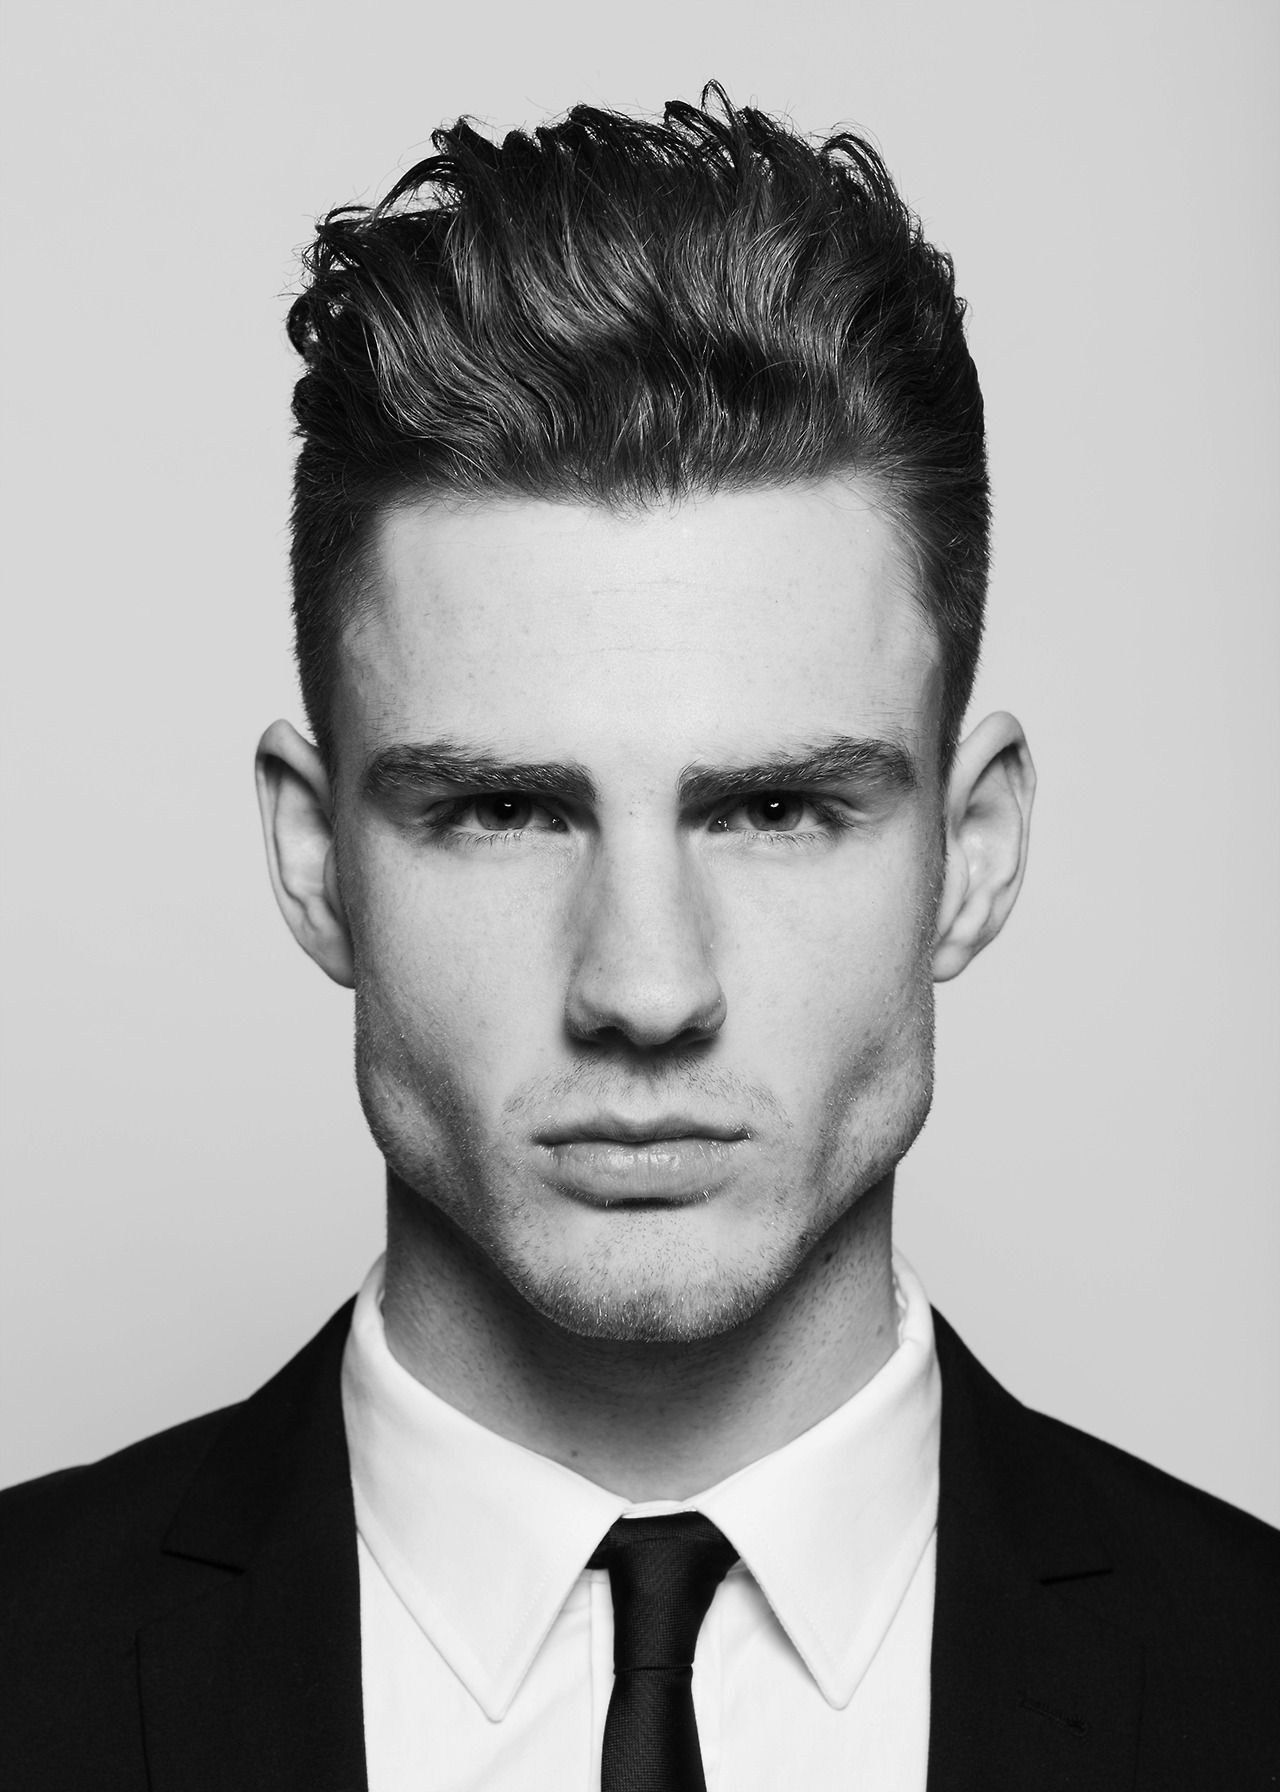 New Hairstyles 2019 Images Awesome How To Style Hair - Taper Fade Haircut White - HD Wallpaper 